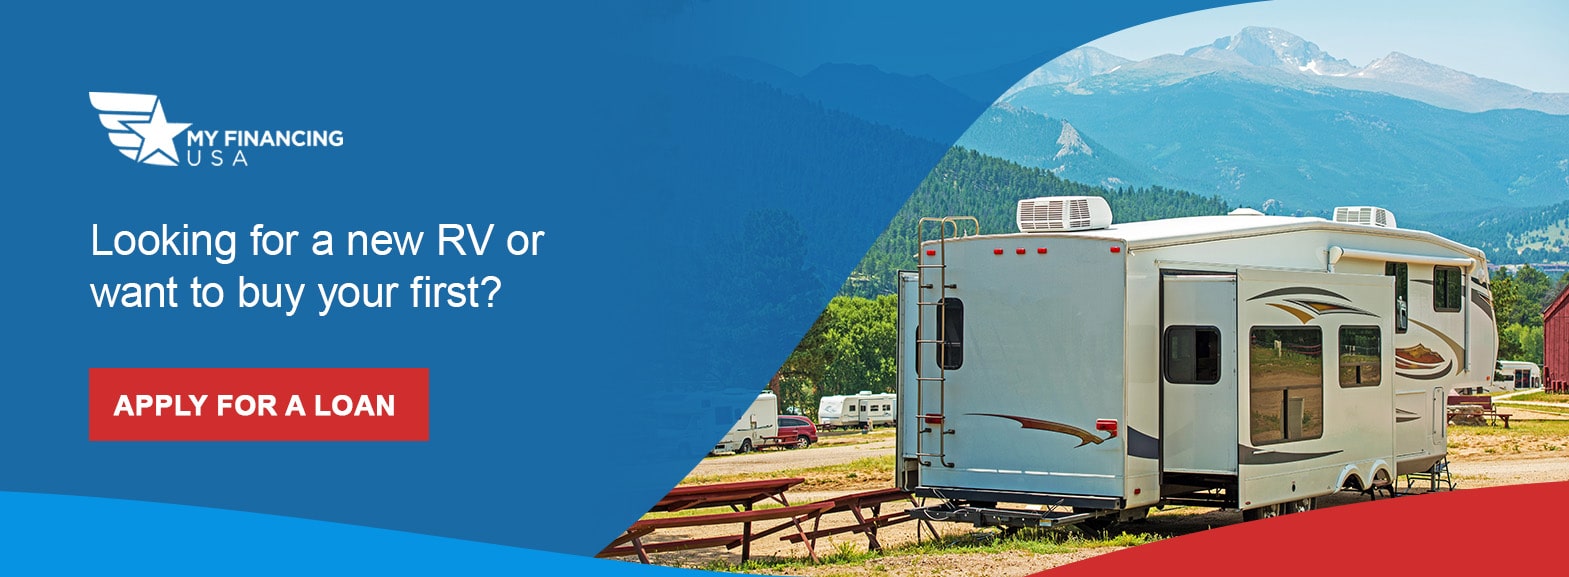 Looking for a new RV or want to buy your first? Apply for a loan!